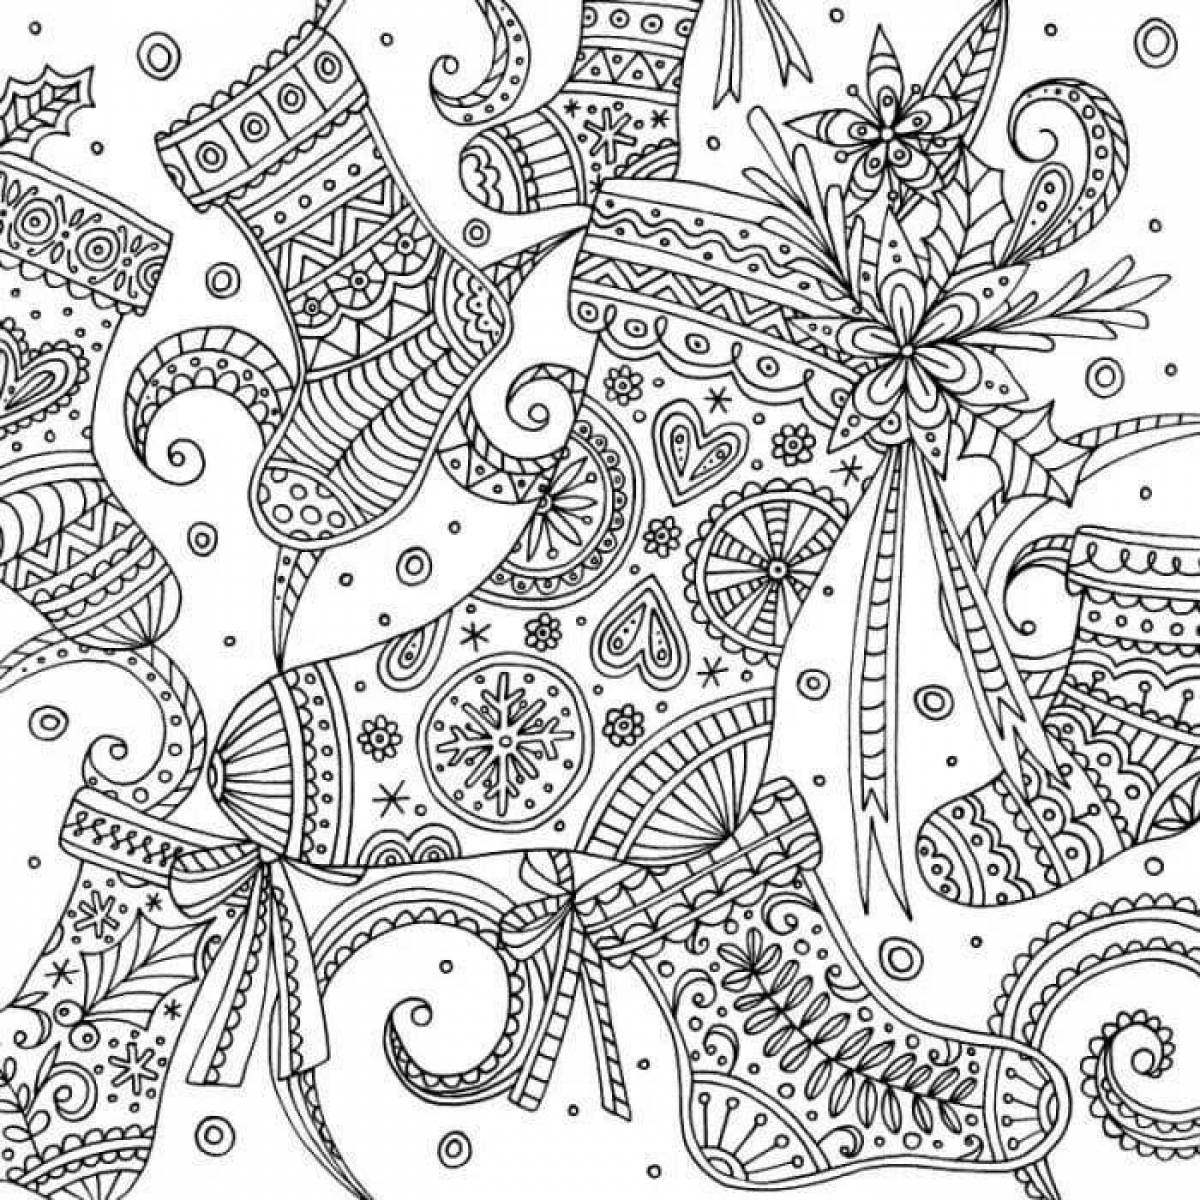 Exquisite antistress winter coloring book